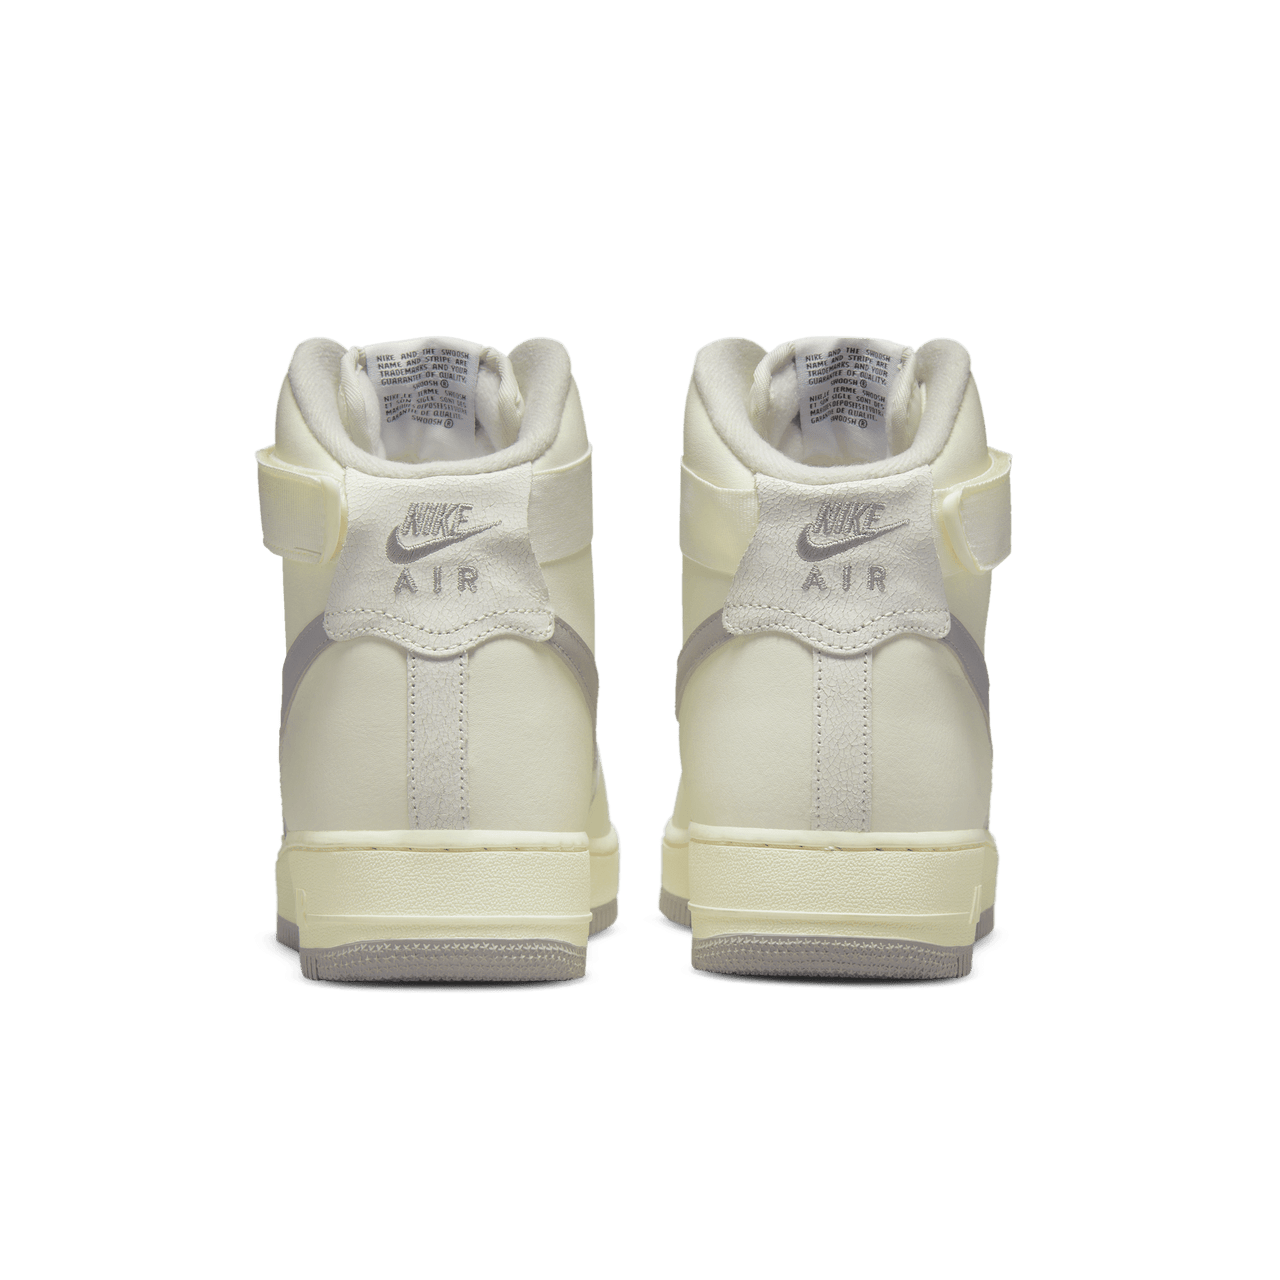 NIKE AIR FORCE 1 HIGH '07 LV8 VINTAGE - WHITE/ LTCHOCOLATE – Undefeated